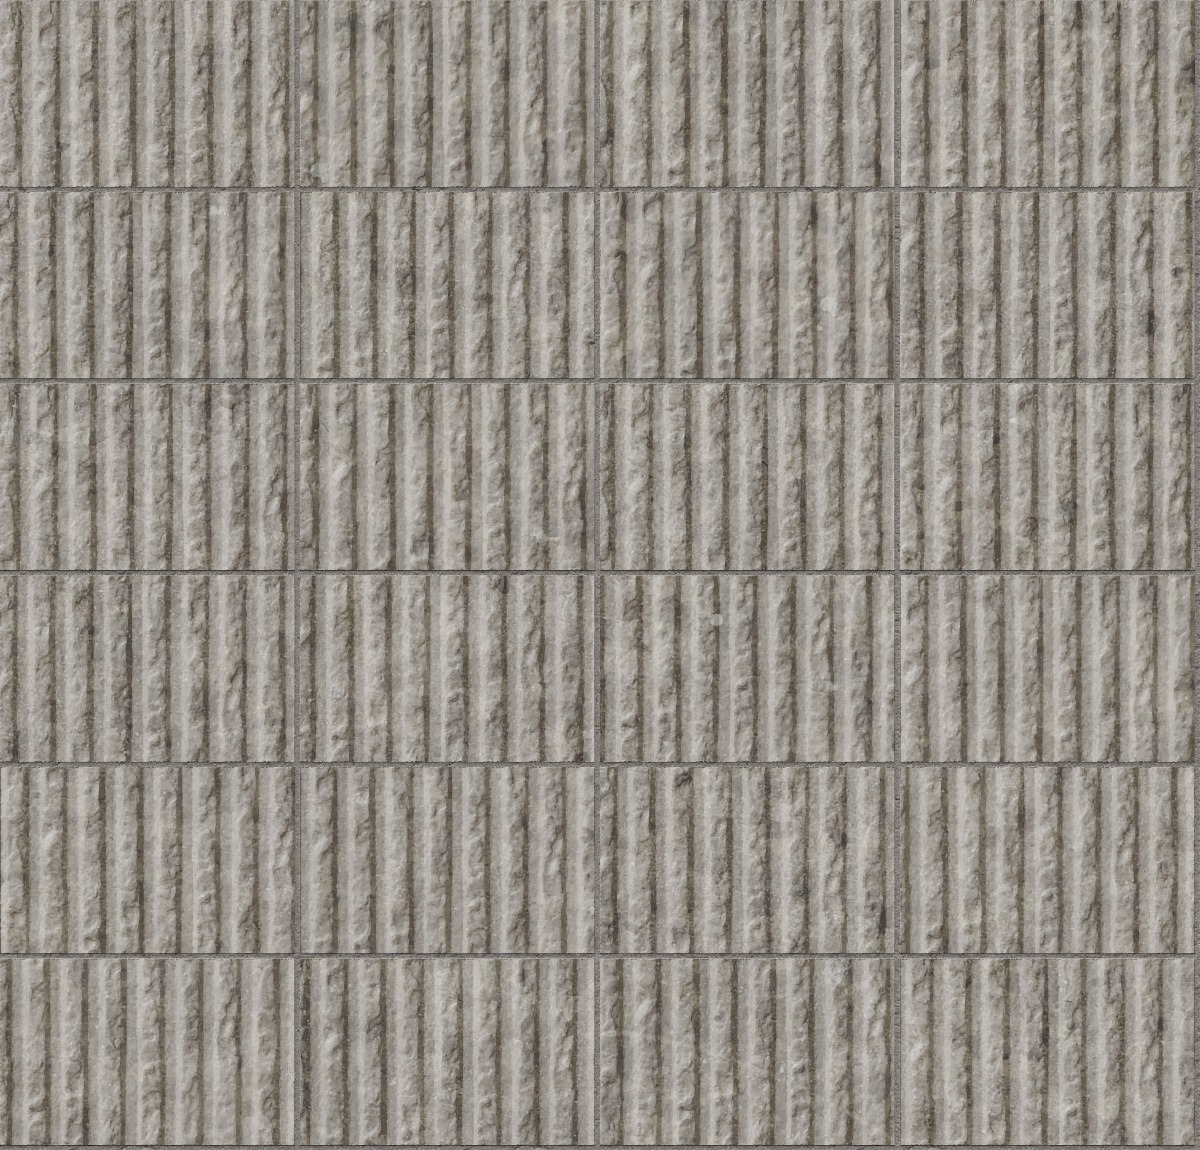 A seamless concrete texture with concrete blocks arranged in a Stack pattern